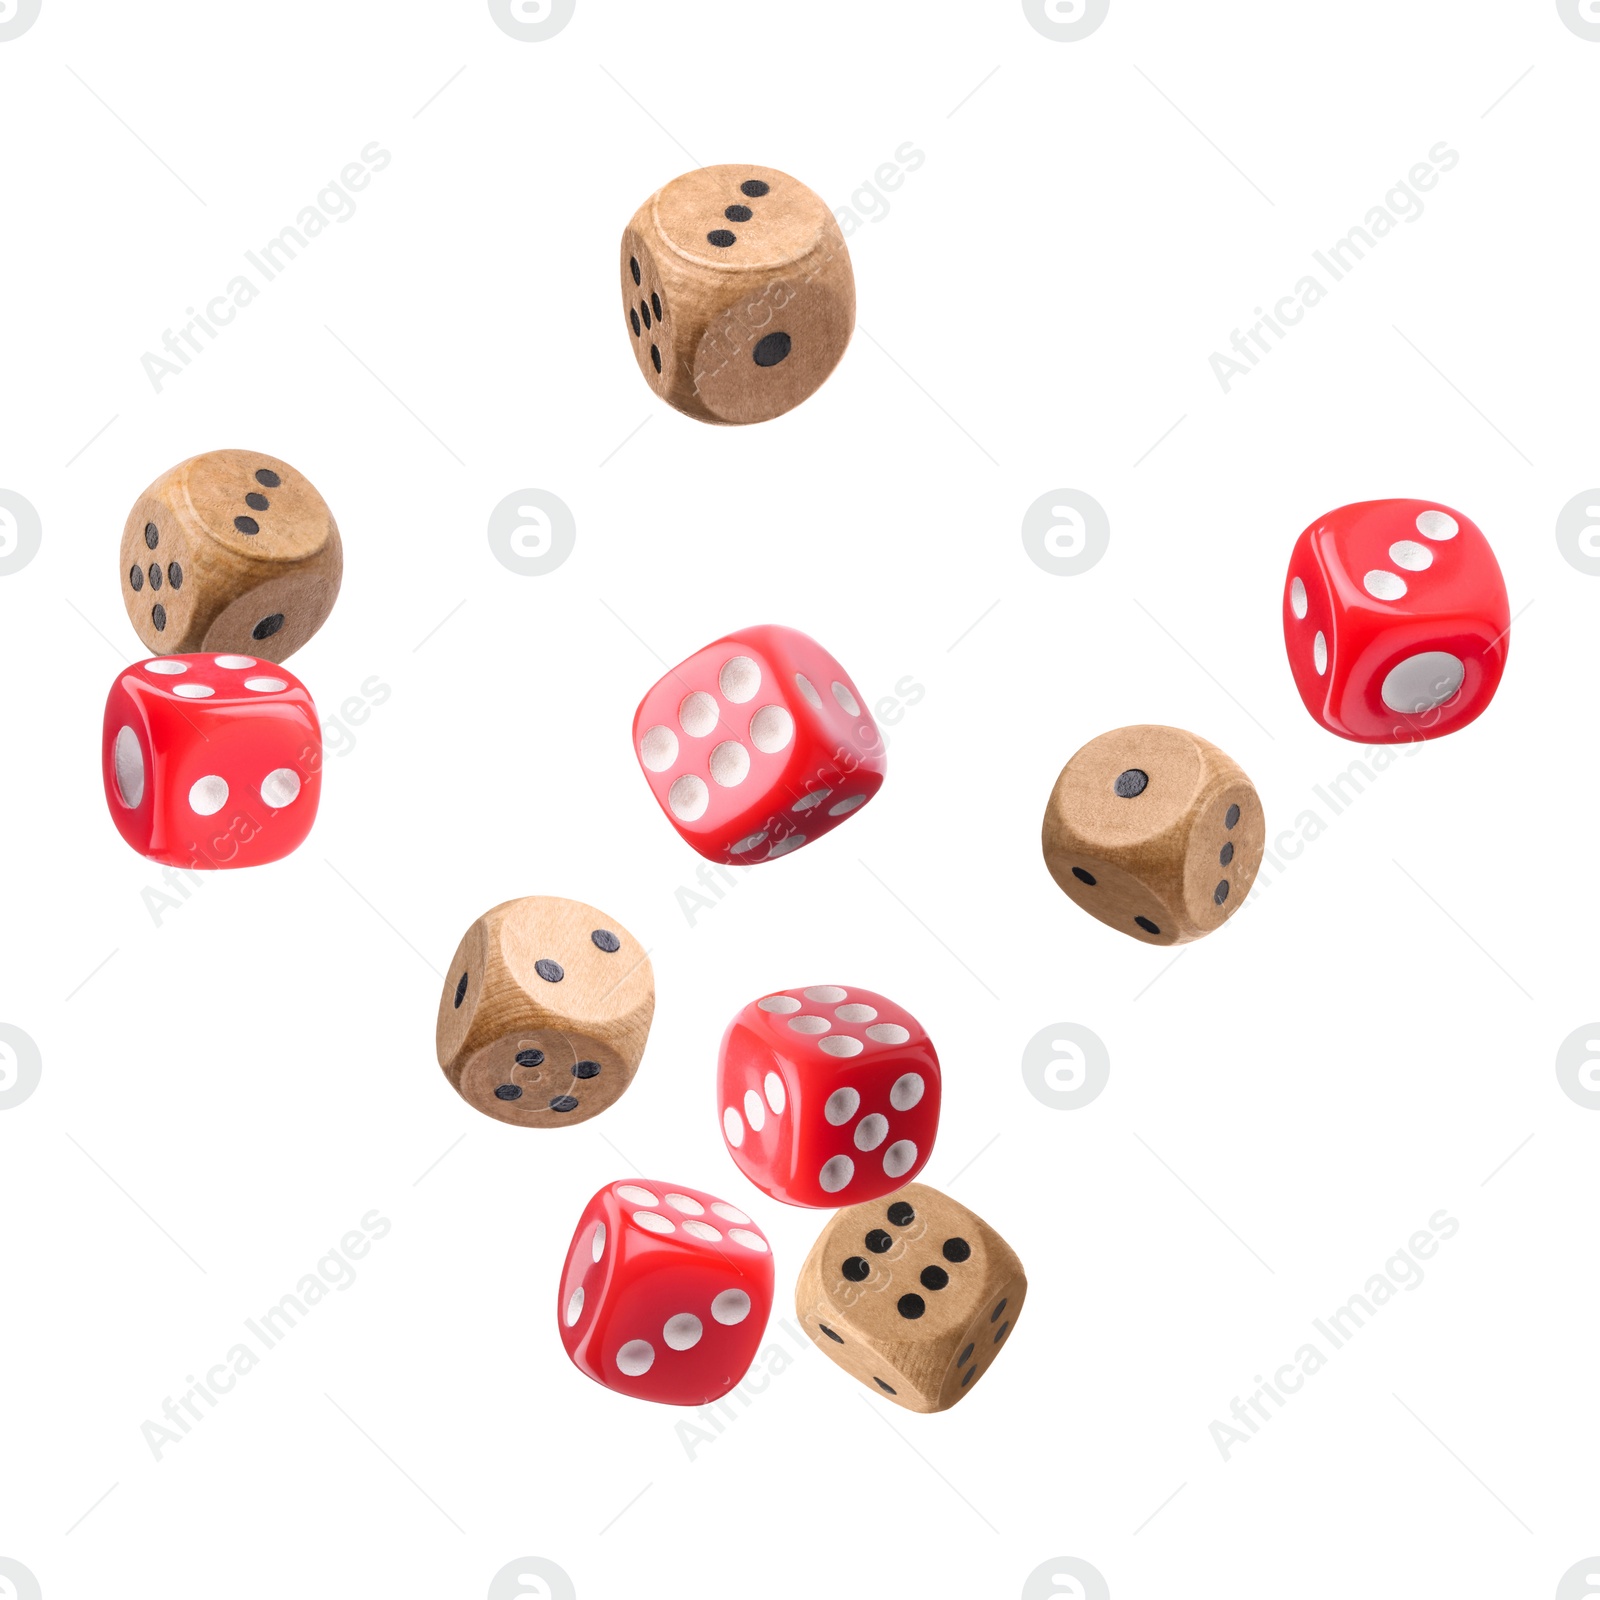 Image of Many different dice in air on white background